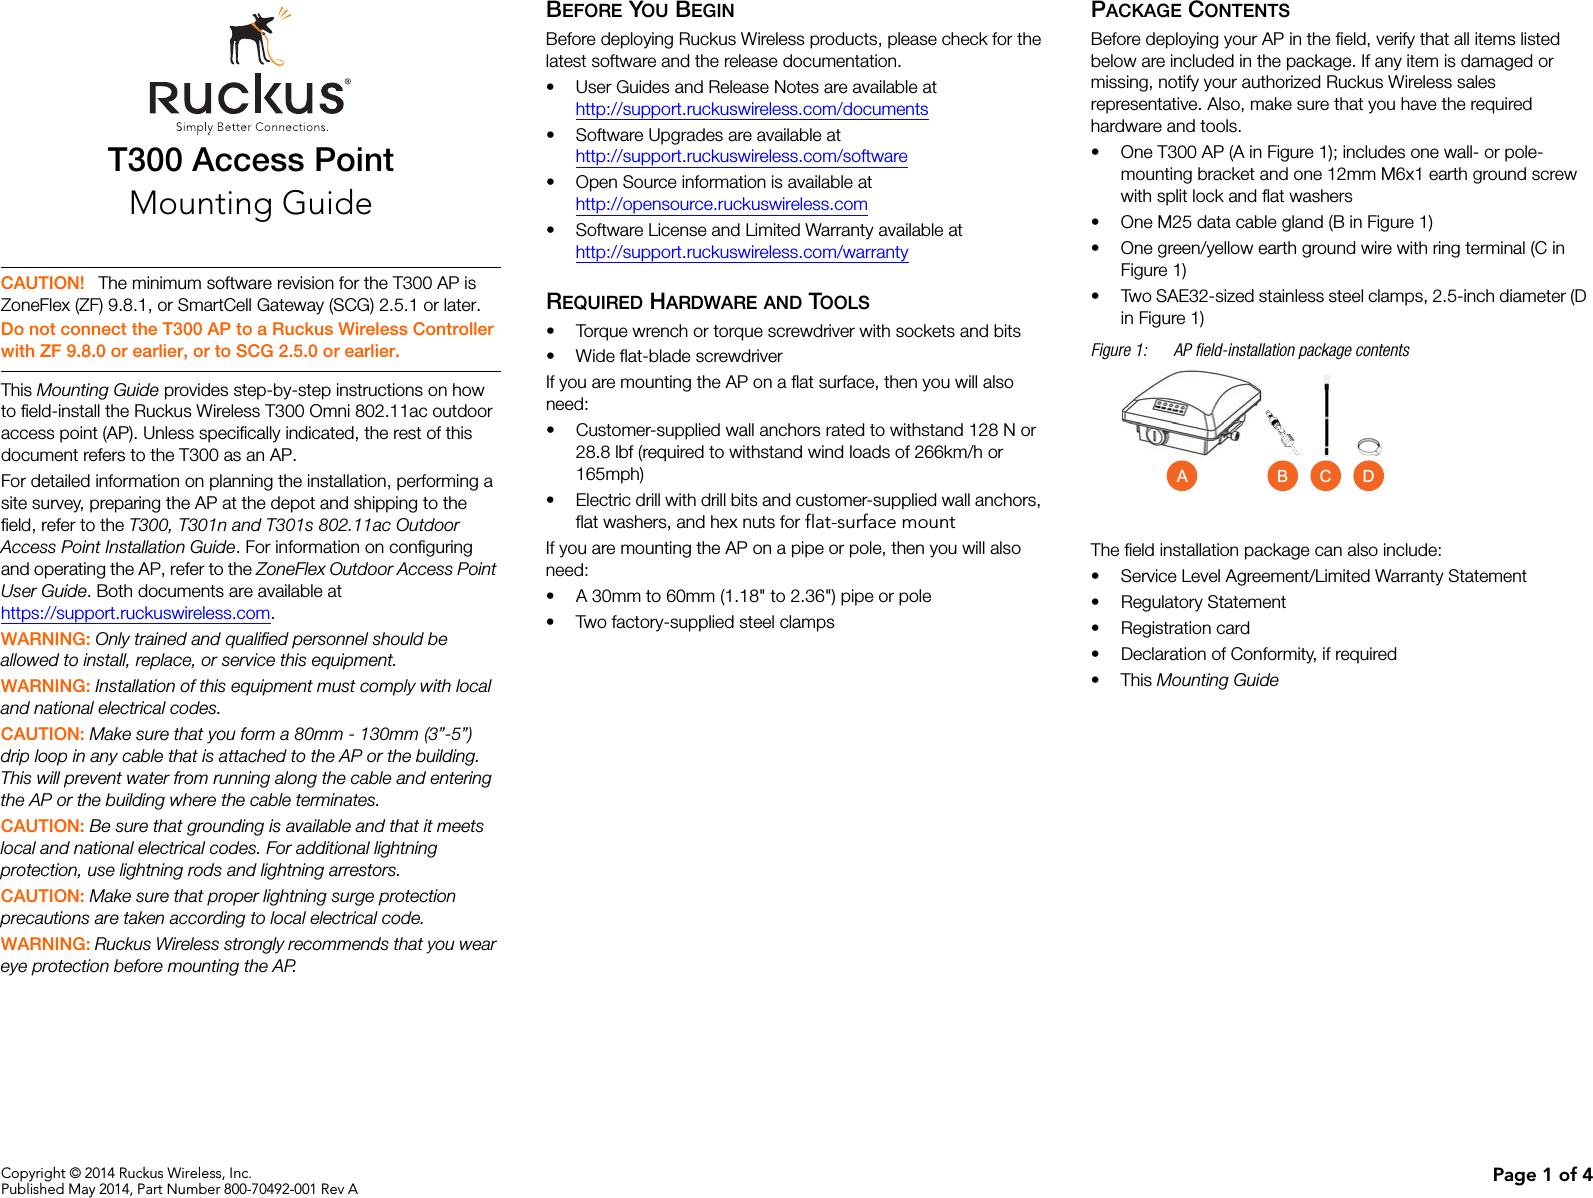 Copyright © 2014 Ruckus Wireless, Inc.Published May 2014, Part Number 800-70492-001 Rev A Page 1 of 4T300 Access PointMounting GuideThis Mounting Guide provides step-by-step instructions on how to field-install the Ruckus Wireless T300 Omni 802.11ac outdoor access point (AP). Unless specifically indicated, the rest of this document refers to the T300 as an AP.For detailed information on planning the installation, performing a site survey, preparing the AP at the depot and shipping to the field, refer to the T300, T301n and T301s 802.11ac Outdoor Access Point Installation Guide. For information on configuring and operating the AP, refer to the ZoneFlex Outdoor Access Point User Guide. Both documents are available at https://support.ruckuswireless.com.WARNING: Only trained and qualified personnel should be allowed to install, replace, or service this equipment. WARNING: Installation of this equipment must comply with local and national electrical codes. CAUTION: Make sure that you form a 80mm - 130mm (3”-5”) drip loop in any cable that is attached to the AP or the building. This will prevent water from running along the cable and entering the AP or the building where the cable terminates. CAUTION: Be sure that grounding is available and that it meets local and national electrical codes. For additional lightning protection, use lightning rods and lightning arrestors. CAUTION: Make sure that proper lightning surge protection precautions are taken according to local electrical code. WARNING: Ruckus Wireless strongly recommends that you wear eye protection before mounting the AP.BEFORE YOU BEGINBefore deploying Ruckus Wireless products, please check for the latest software and the release documentation.• User Guides and Release Notes are available athttp://support.ruckuswireless.com/documents• Software Upgrades are available athttp://support.ruckuswireless.com/software• Open Source information is available athttp://opensource.ruckuswireless.com• Software License and Limited Warranty available athttp://support.ruckuswireless.com/warrantyREQUIRED HARDWARE AND TOOLS• Torque wrench or torque screwdriver with sockets and bits• Wide flat-blade screwdriverIf you are mounting the AP on a flat surface, then you will also need:• Customer-supplied wall anchors rated to withstand 128 N or 28.8 lbf (required to withstand wind loads of 266km/h or 165mph)• Electric drill with drill bits and customer-supplied wall anchors, flat washers, and hex nuts for flat-surface mountIf you are mounting the AP on a pipe or pole, then you will also need:• A 30mm to 60mm (1.18&quot; to 2.36&quot;) pipe or pole• Two factory-supplied steel clampsPACKAGE CONTENTSBefore deploying your AP in the field, verify that all items listed below are included in the package. If any item is damaged or missing, notify your authorized Ruckus Wireless sales representative. Also, make sure that you have the required hardware and tools. • One T300 AP (A in Figure 1); includes one wall- or pole-mounting bracket and one 12mm M6x1 earth ground screw with split lock and flat washers• One M25 data cable gland (B in Figure 1)• One green/yellow earth ground wire with ring terminal (C in Figure 1)• Two SAE32-sized stainless steel clamps, 2.5-inch diameter (D in Figure 1)Figure 1: AP field-installation package contentsThe field installation package can also include: • Service Level Agreement/Limited Warranty Statement• Regulatory Statement• Registration card• Declaration of Conformity, if required•This Mounting Guide CAUTION! The minimum software revision for the T300 AP is ZoneFlex (ZF) 9.8.1, or SmartCell Gateway (SCG) 2.5.1 or later.Do not connect the T300 AP to a Ruckus Wireless Controller with ZF 9.8.0 or earlier, or to SCG 2.5.0 or earlier.A CB D